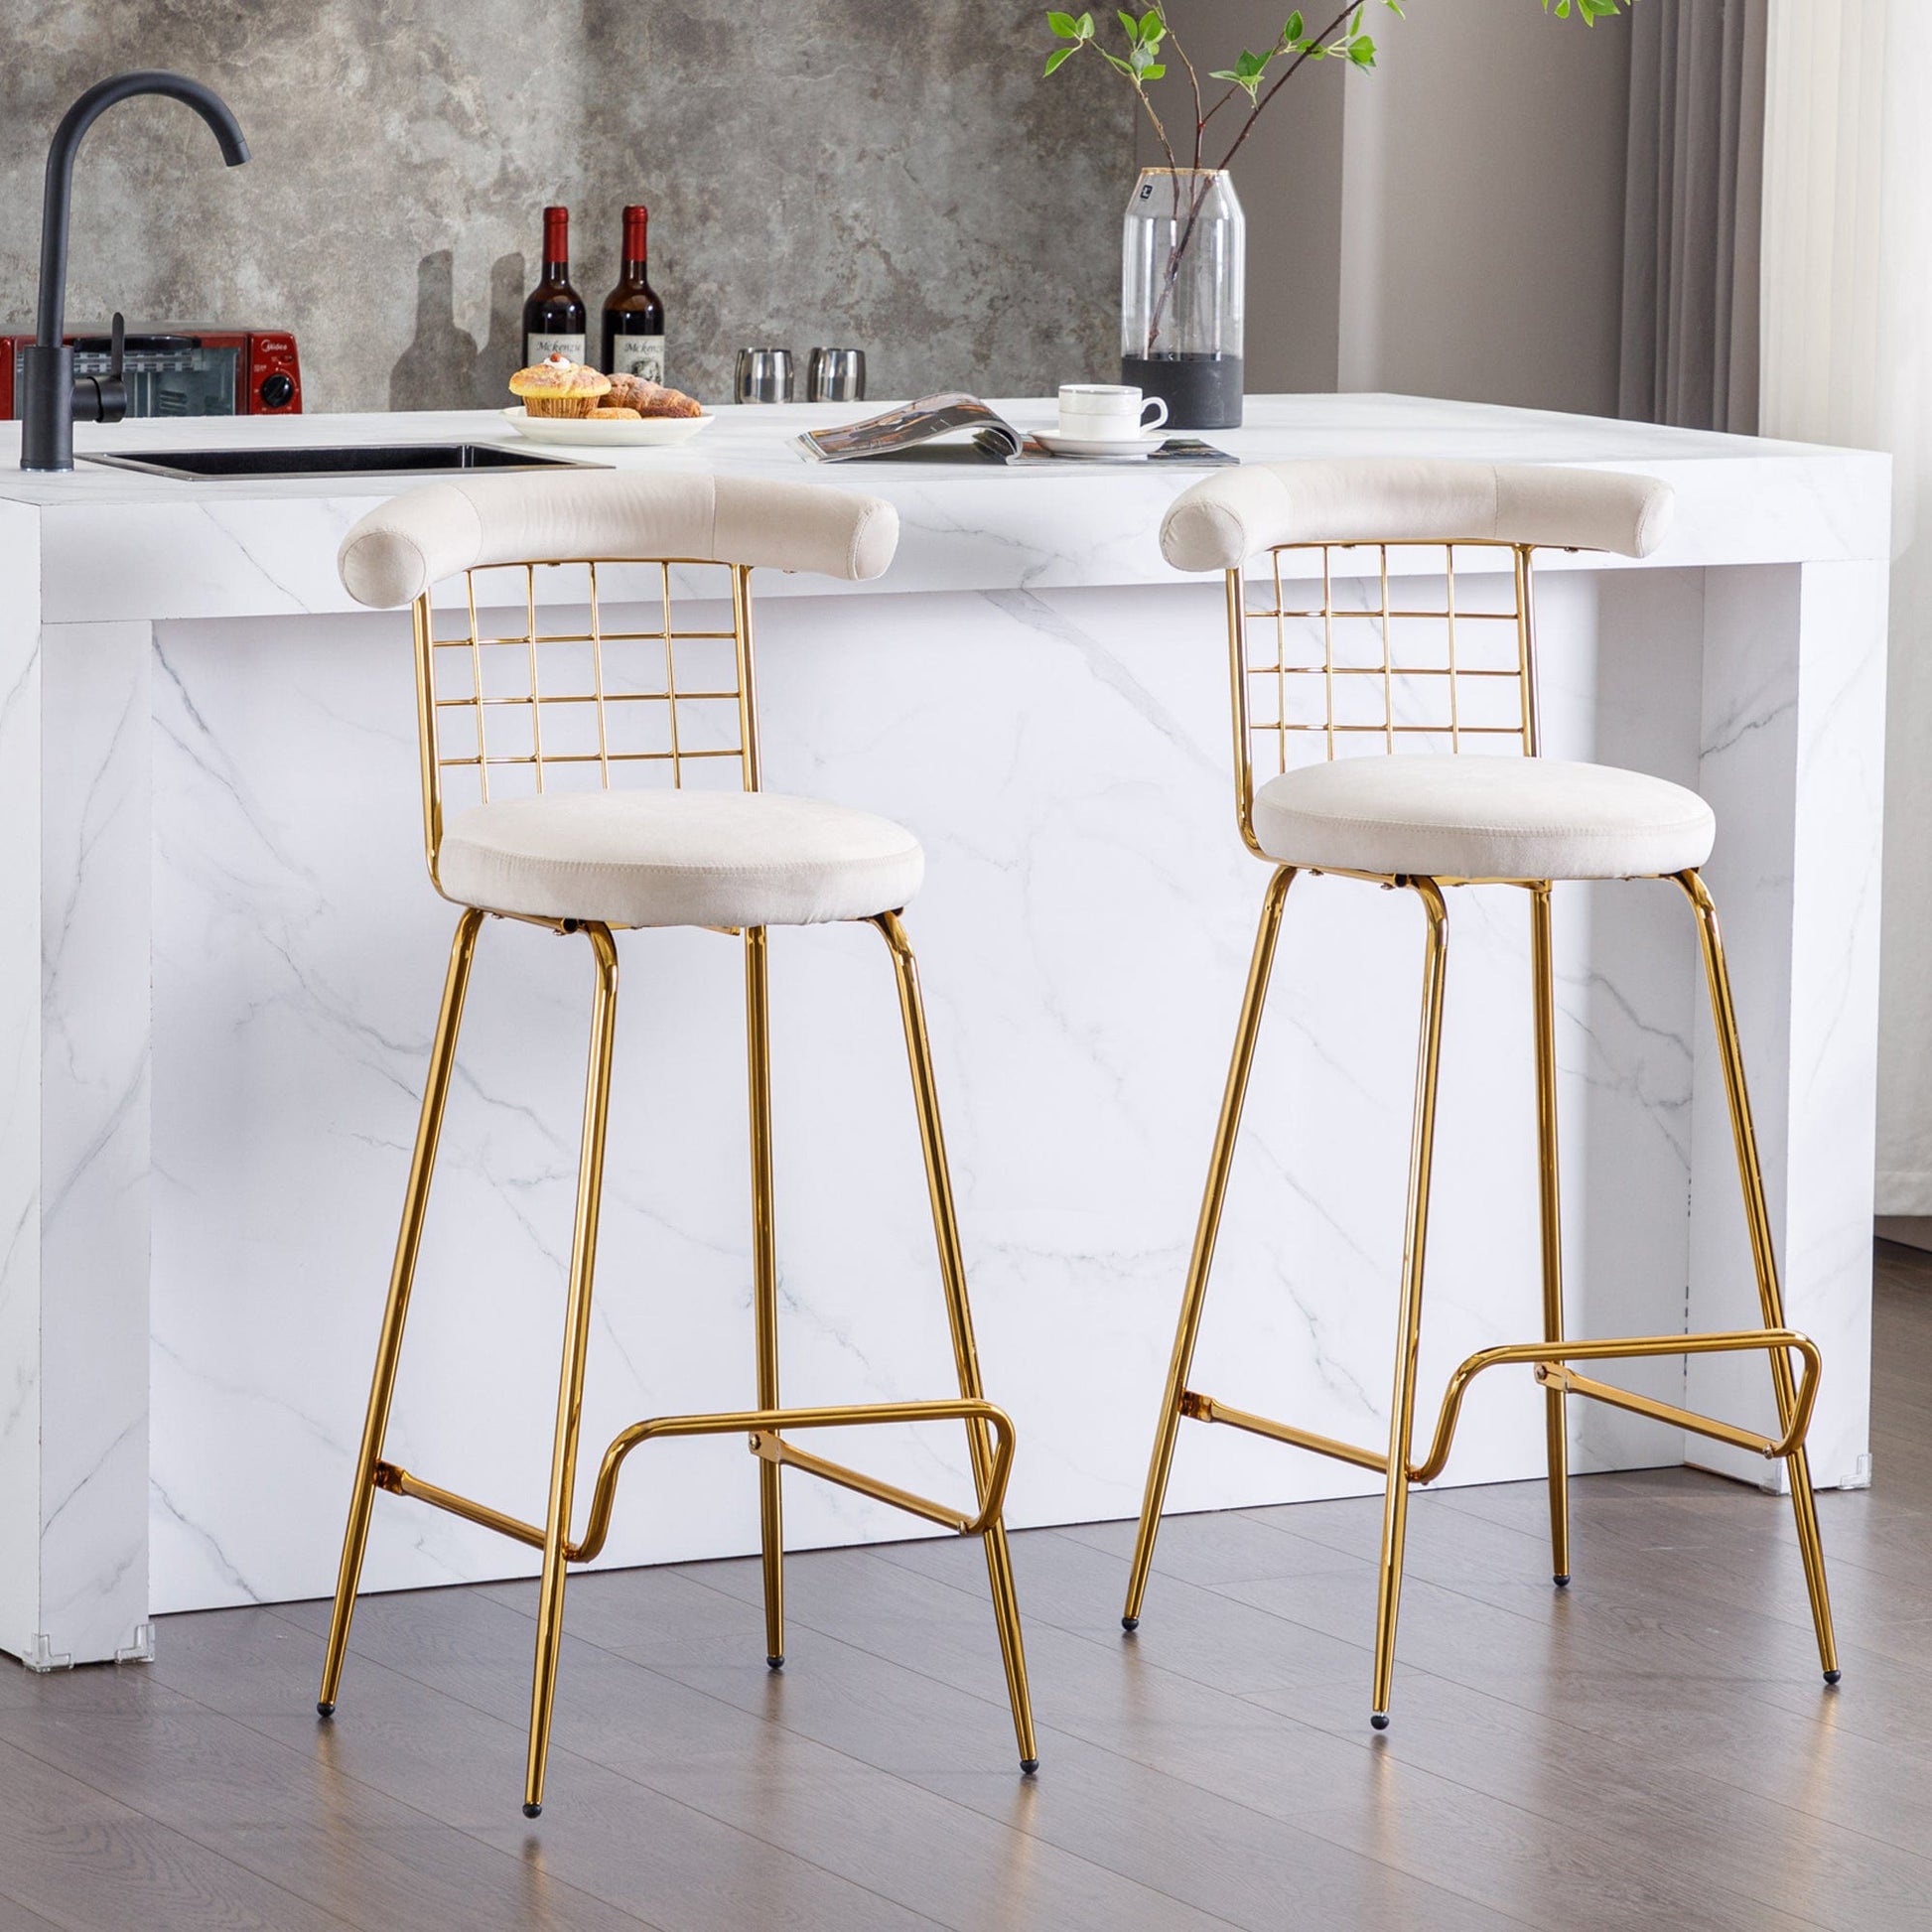 1st Choice Furniture Direct Bar Stool (Set of 2) 1st Choice Set of 2 Velvet High Bar Stool Set with Metal Legs in Beige